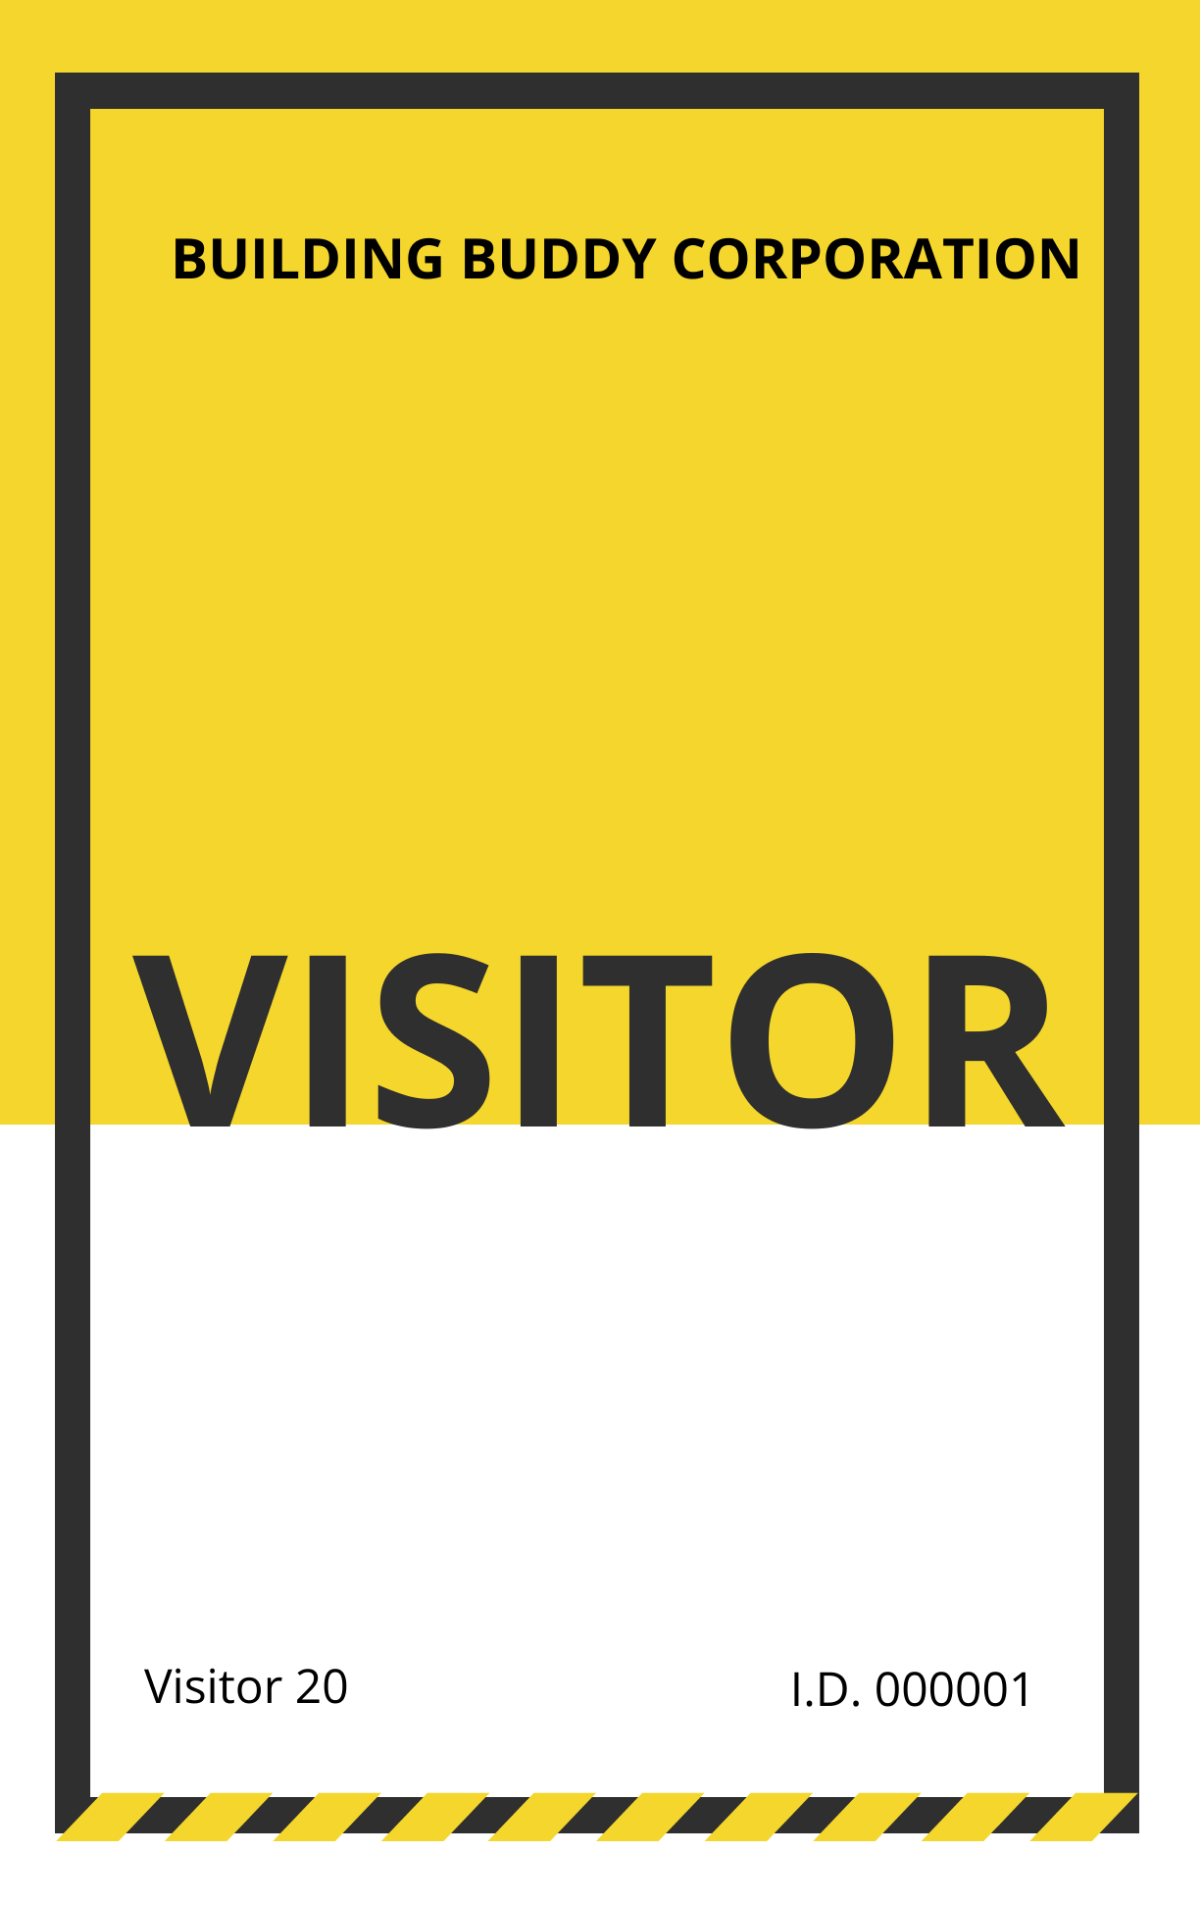 Construction Visitor ID Card